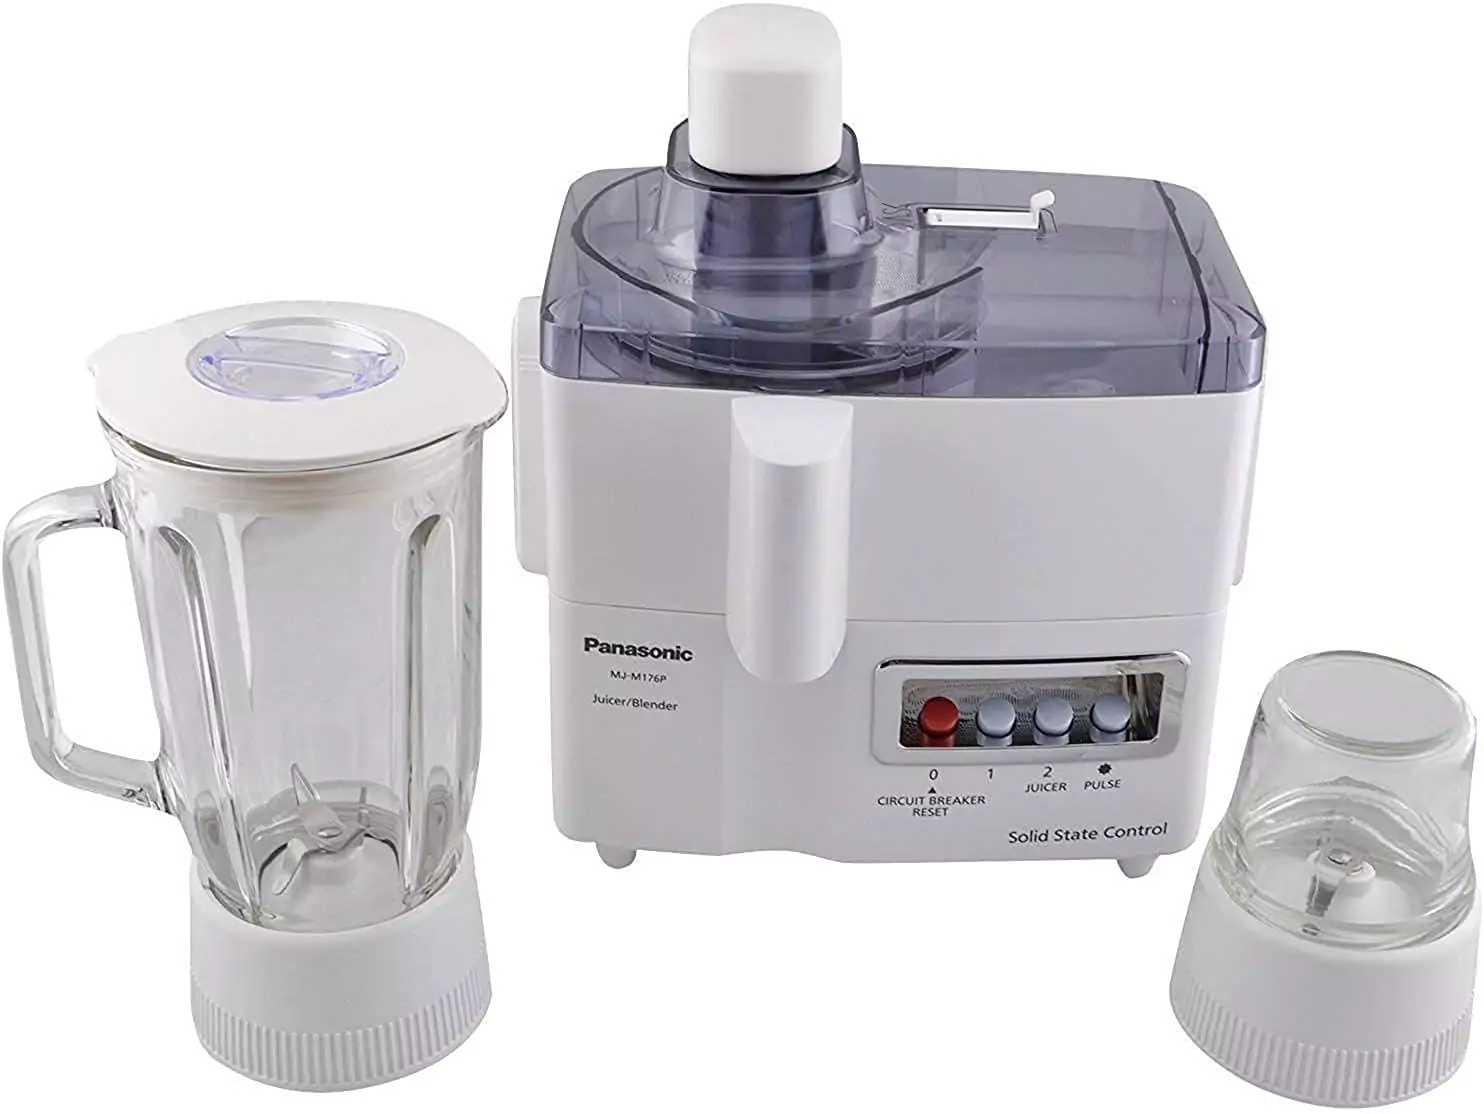 Panasonic MJ-M176P Blender 3 in 1, made in Malaysia